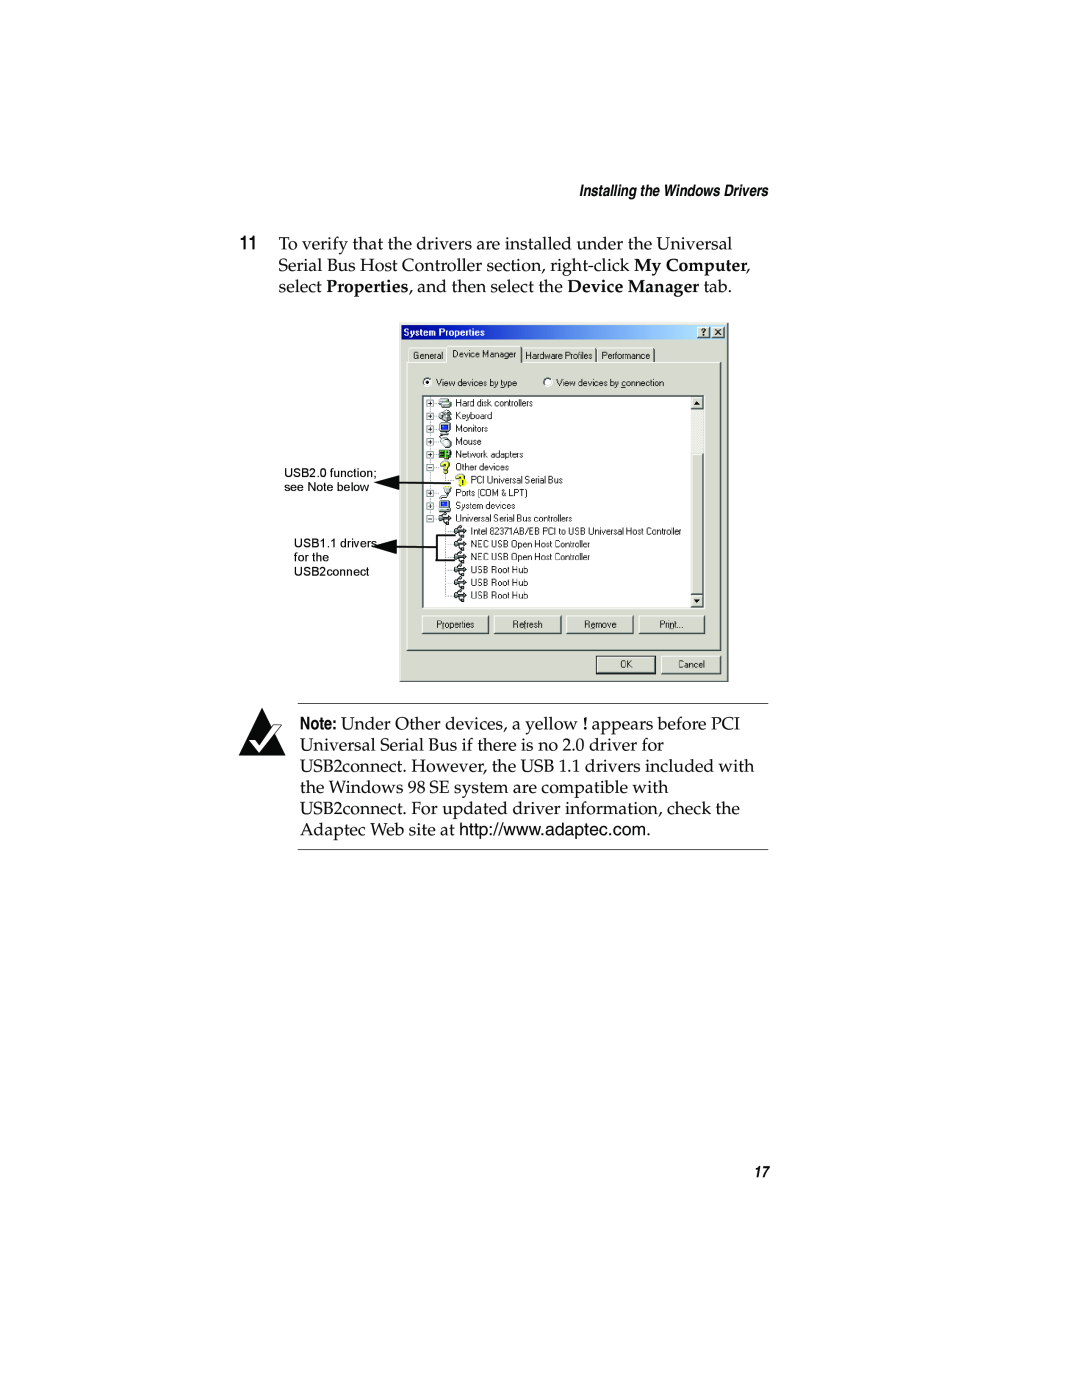 Adaptec USB2connect Host Bus Adapter manual Installing the Windows Drivers 